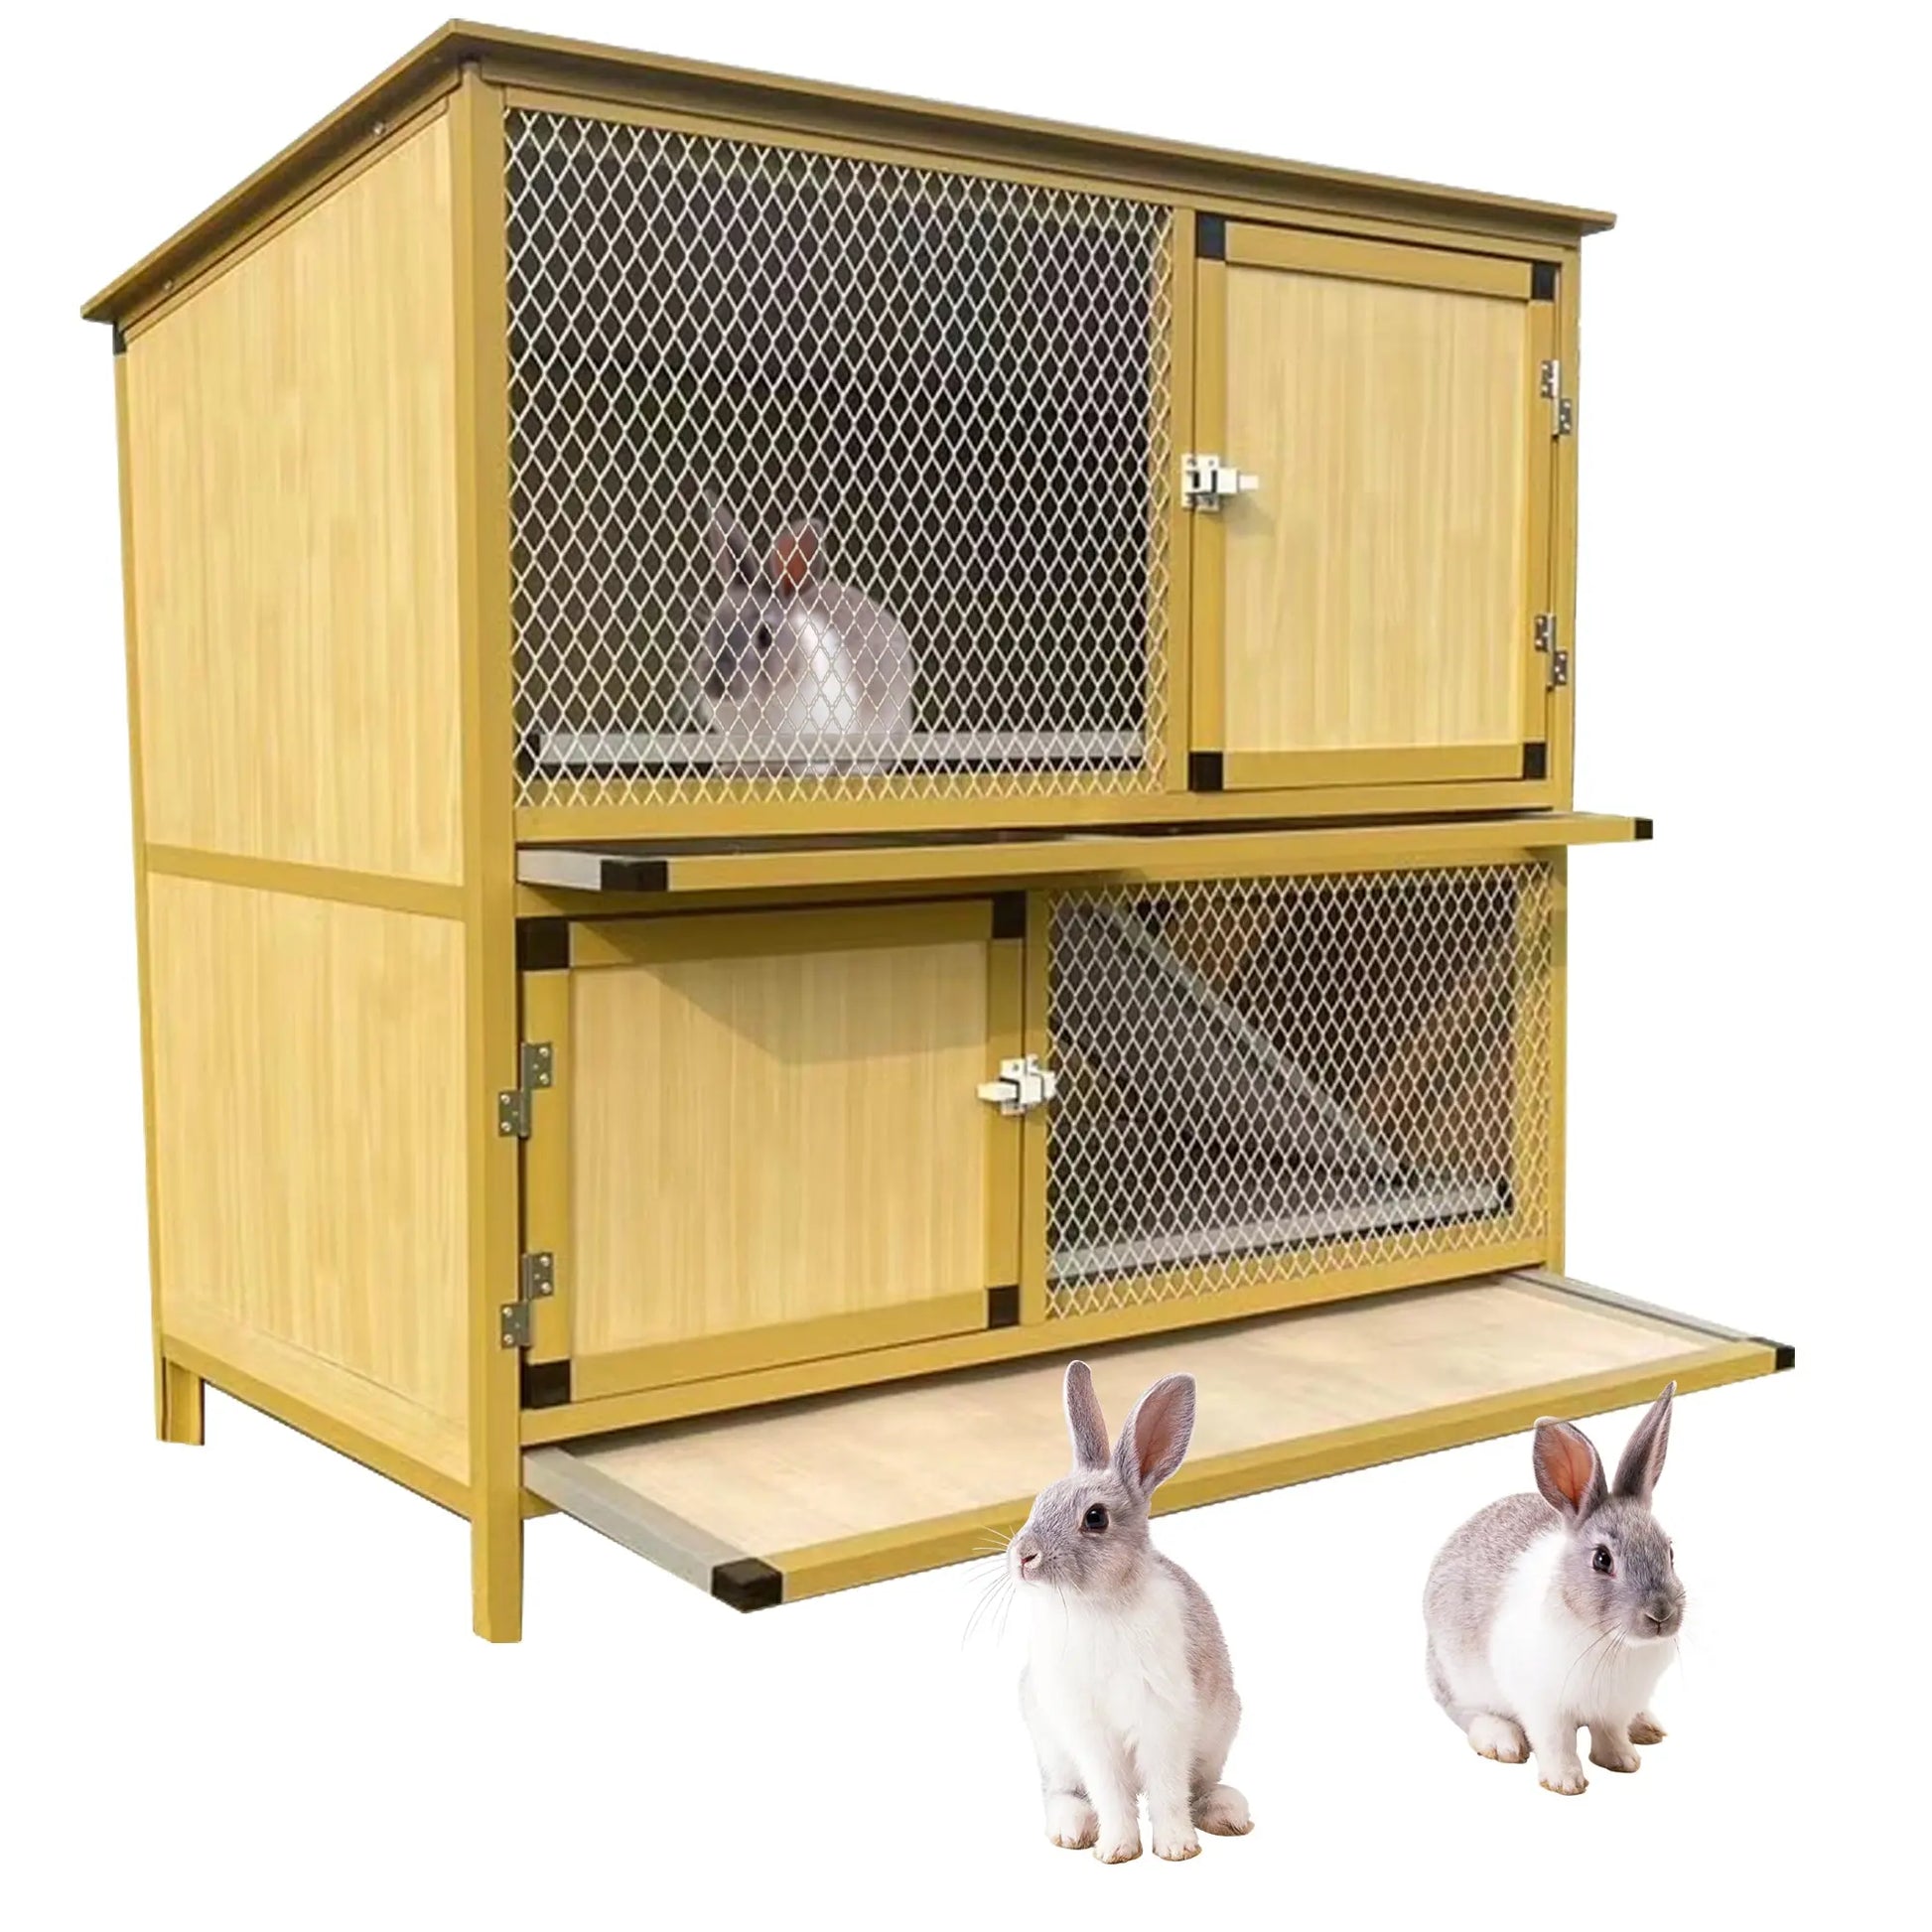 Talis-us Rabbit Hutch Small Animals Habitat with Ramp, Removable Tray, and Weatherproof Roof Talis Us